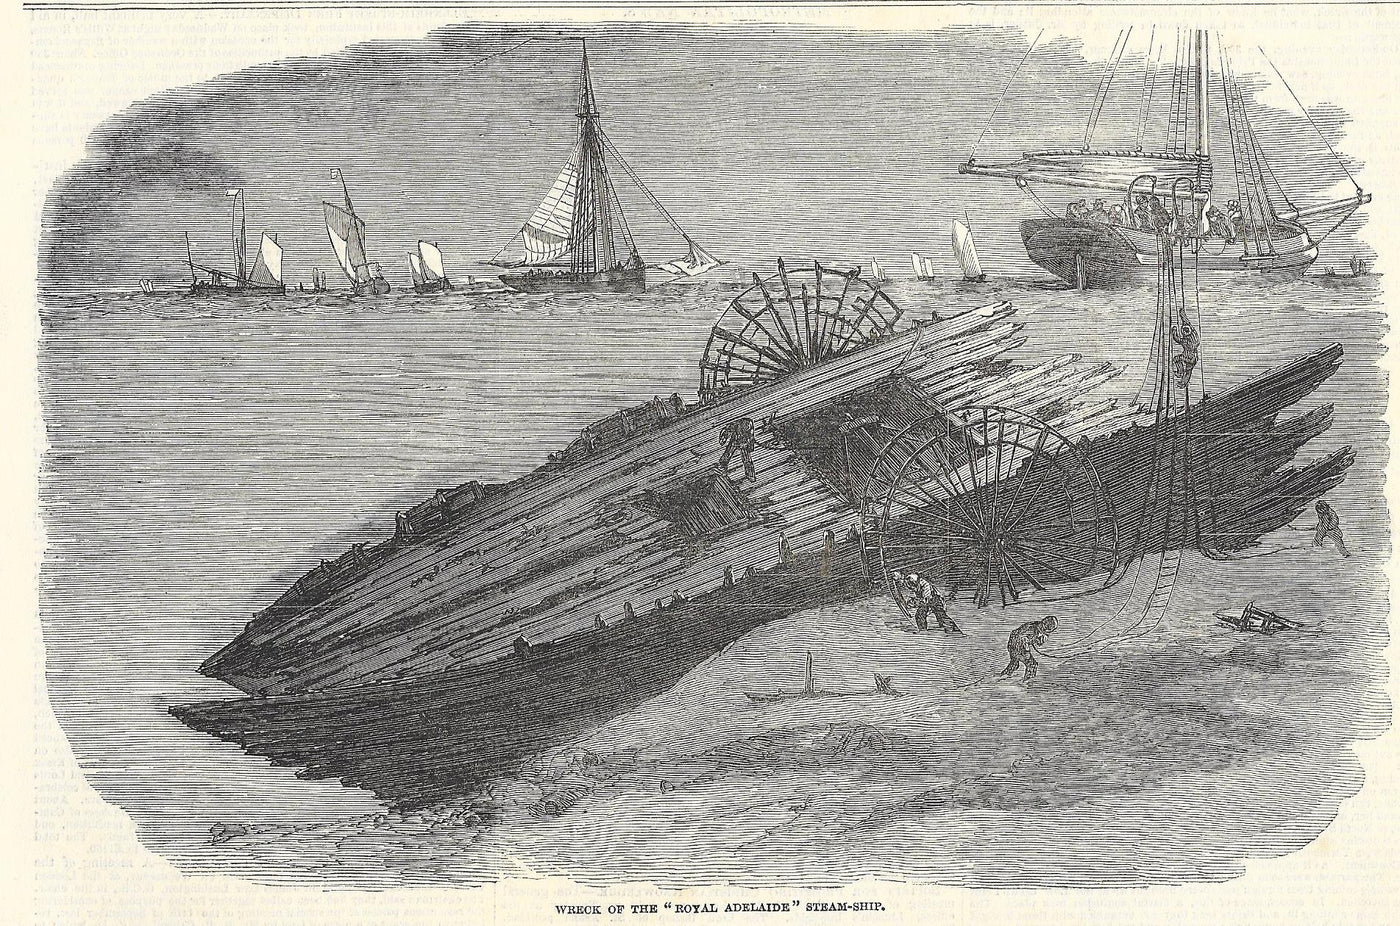 Divers salvaging the wreck of the Royal Adelaide steamship 1850